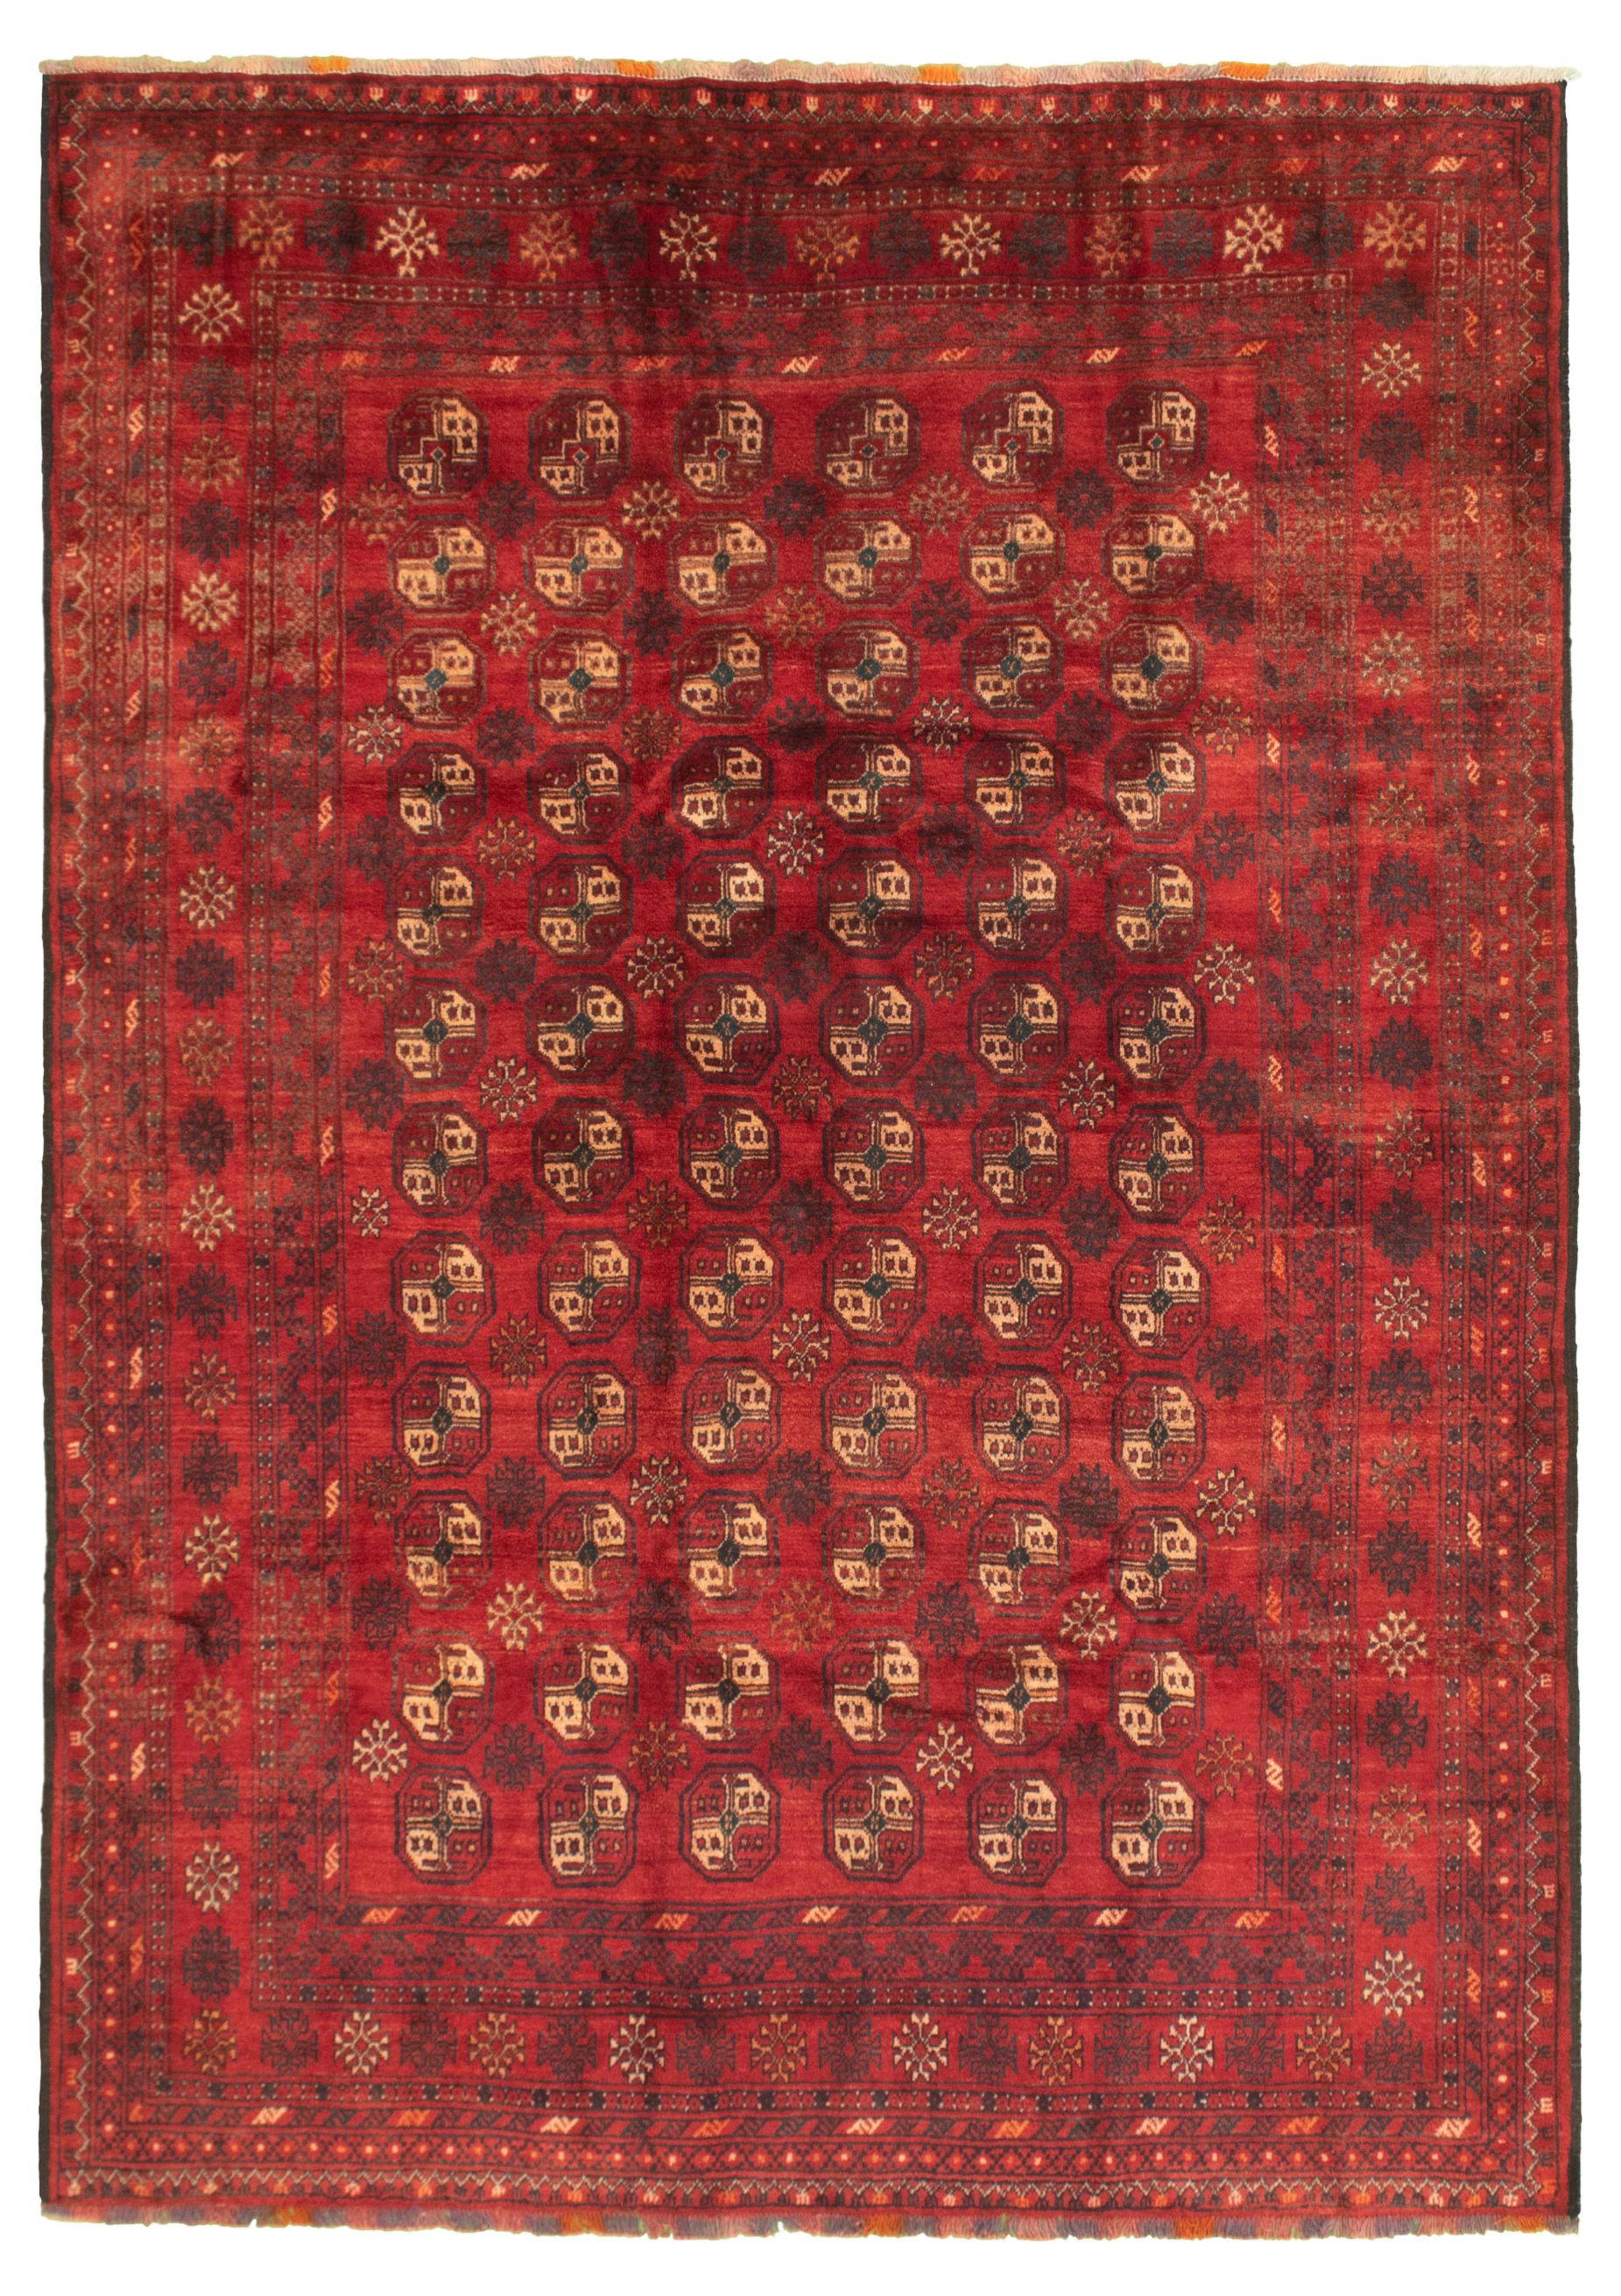 Hand-knotted Authentic Turkish Red Wool Rug 6'10" x 9'6" Size: 6'10" x 9'6"  